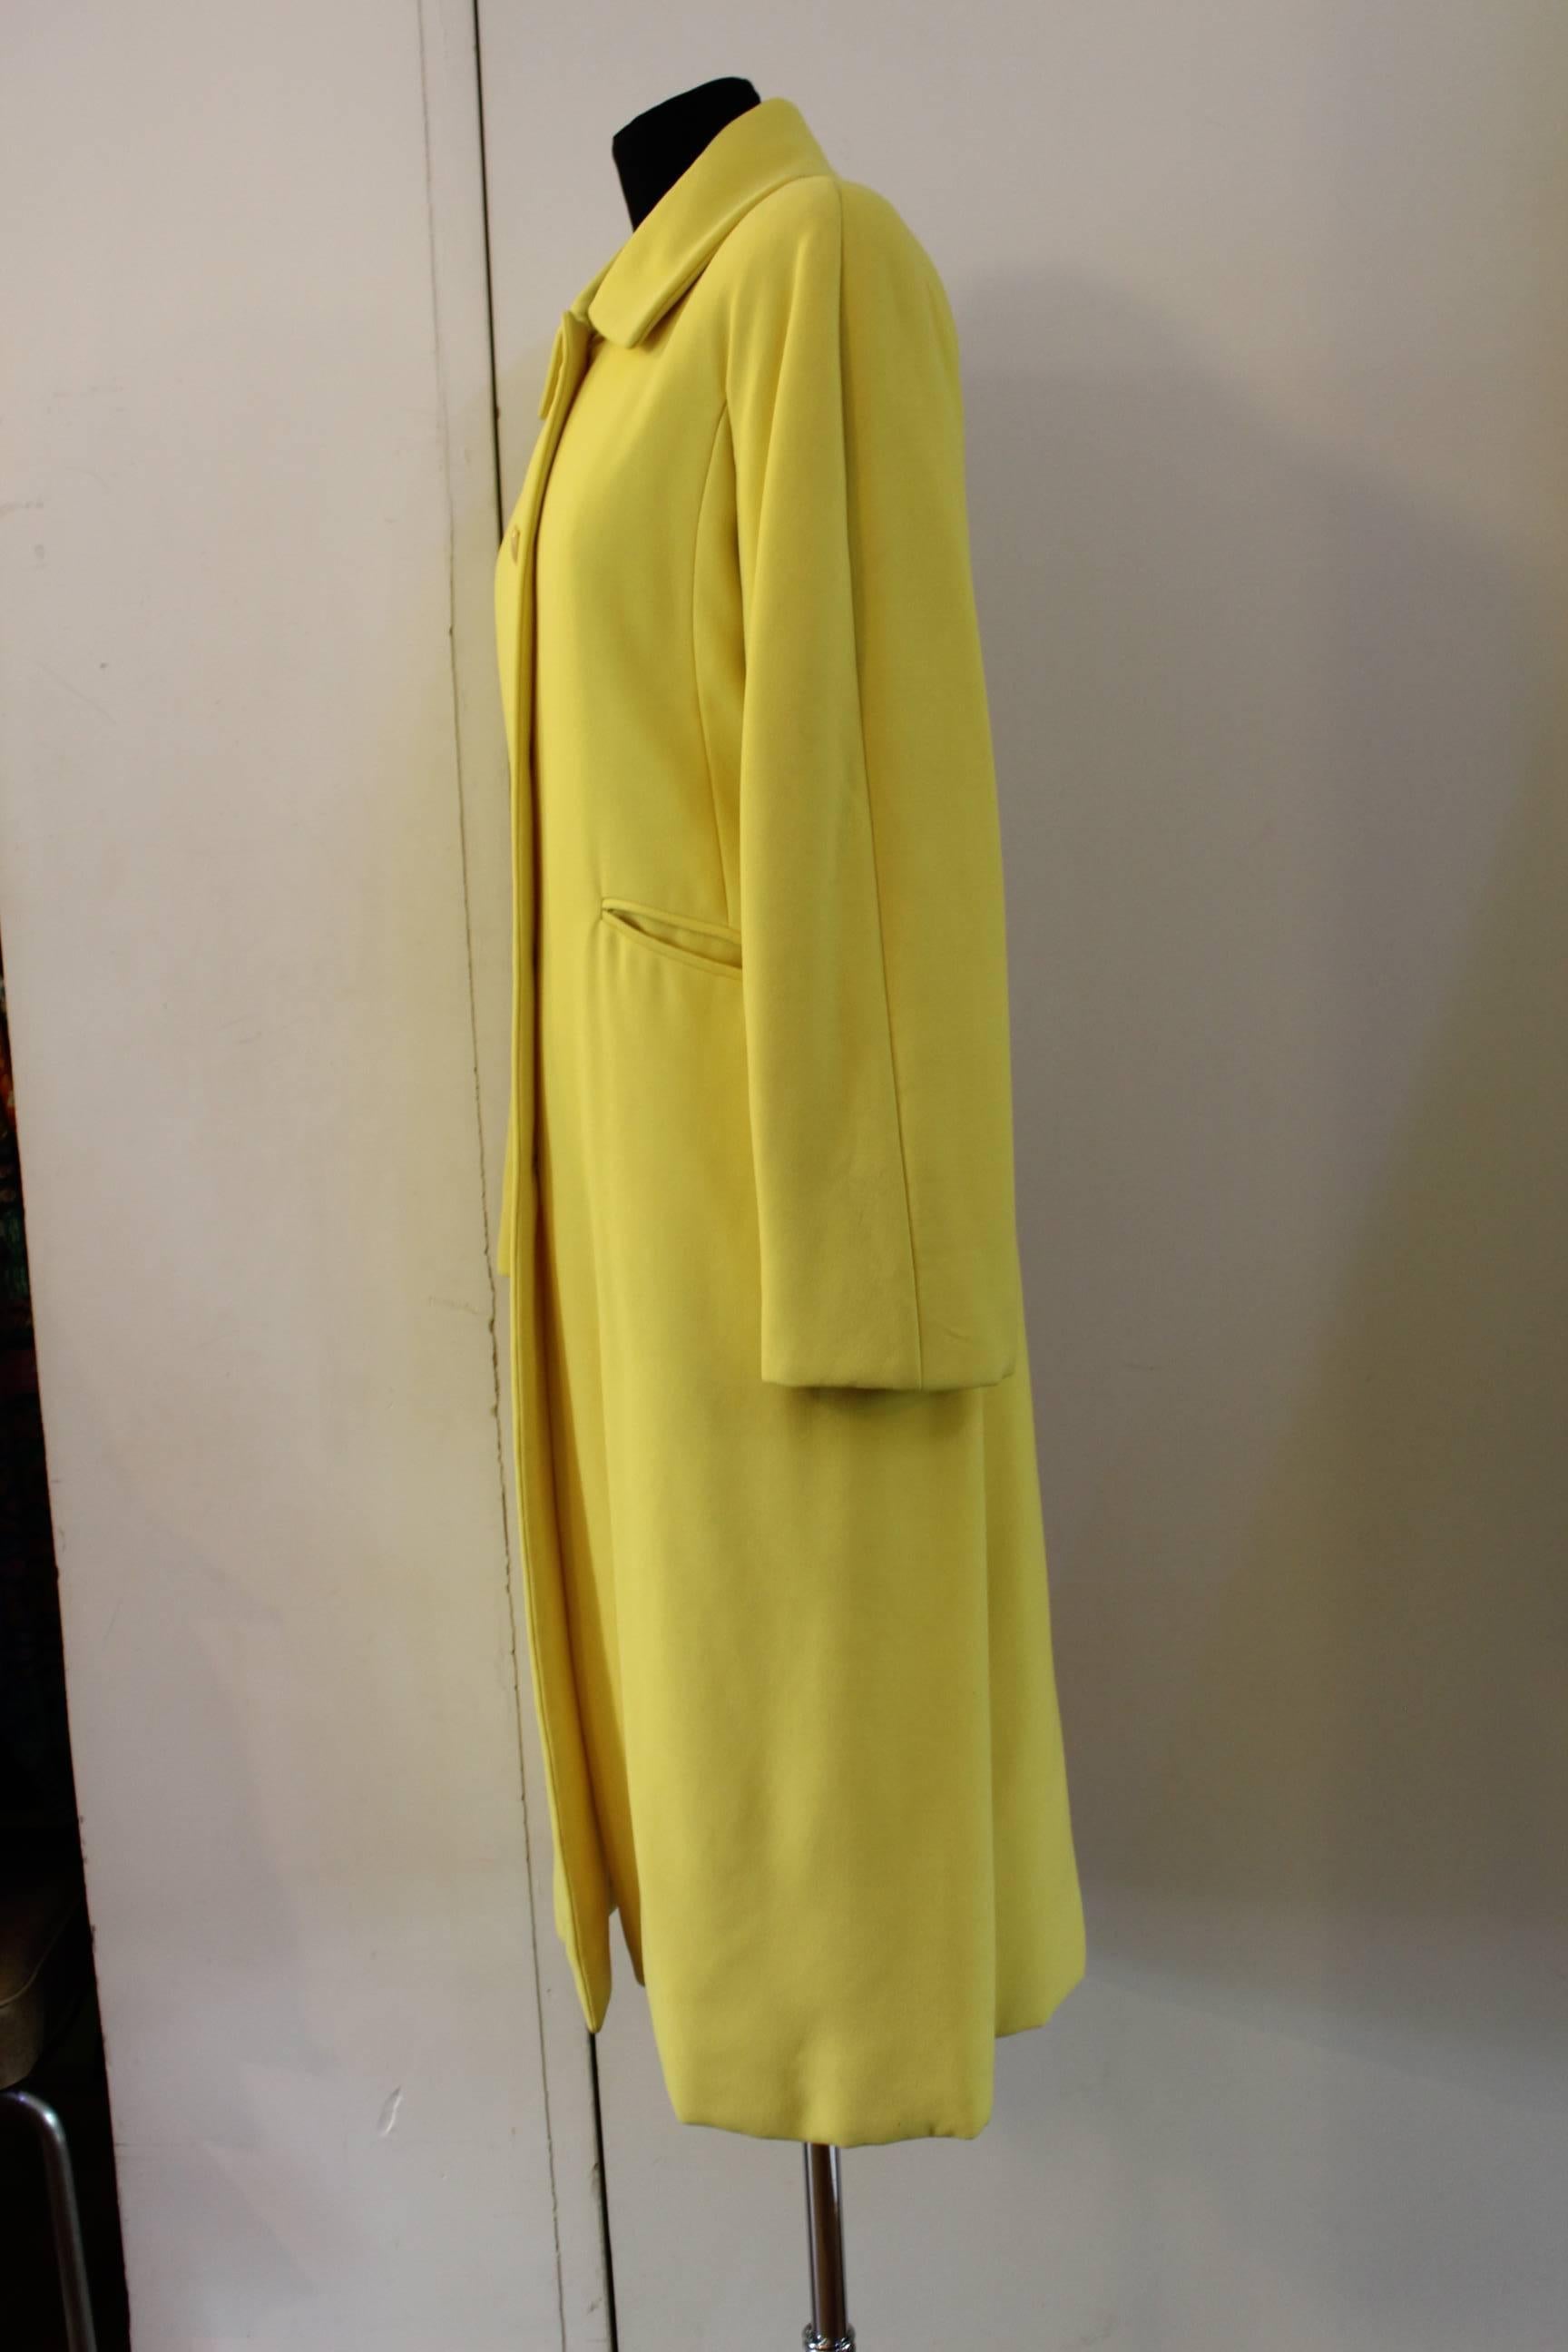 Really nice Vintage Hermes coat in yellow wool.
Size french 38.
Really nice work in the buttons with hermes logo
Really good condition